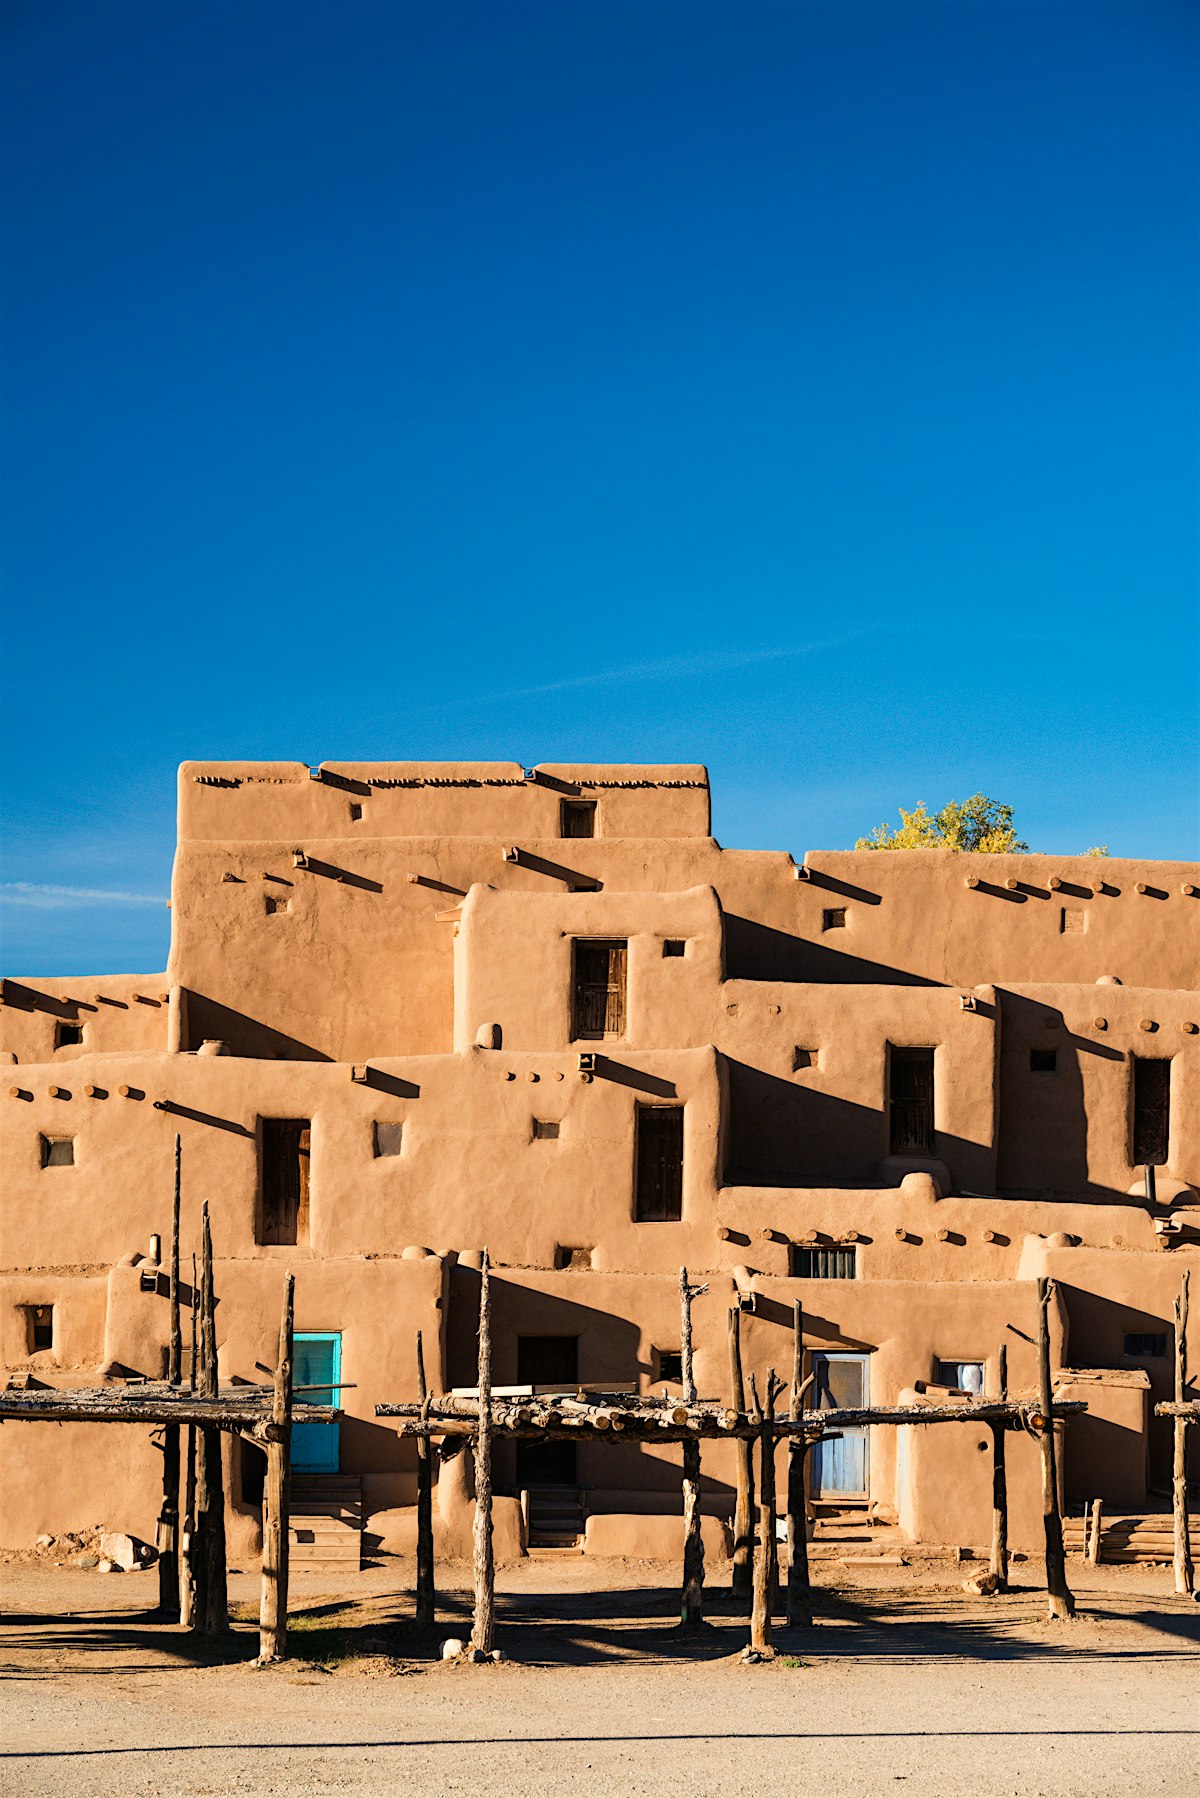 Taos travel | The Southwest, USA - Lonely Planet